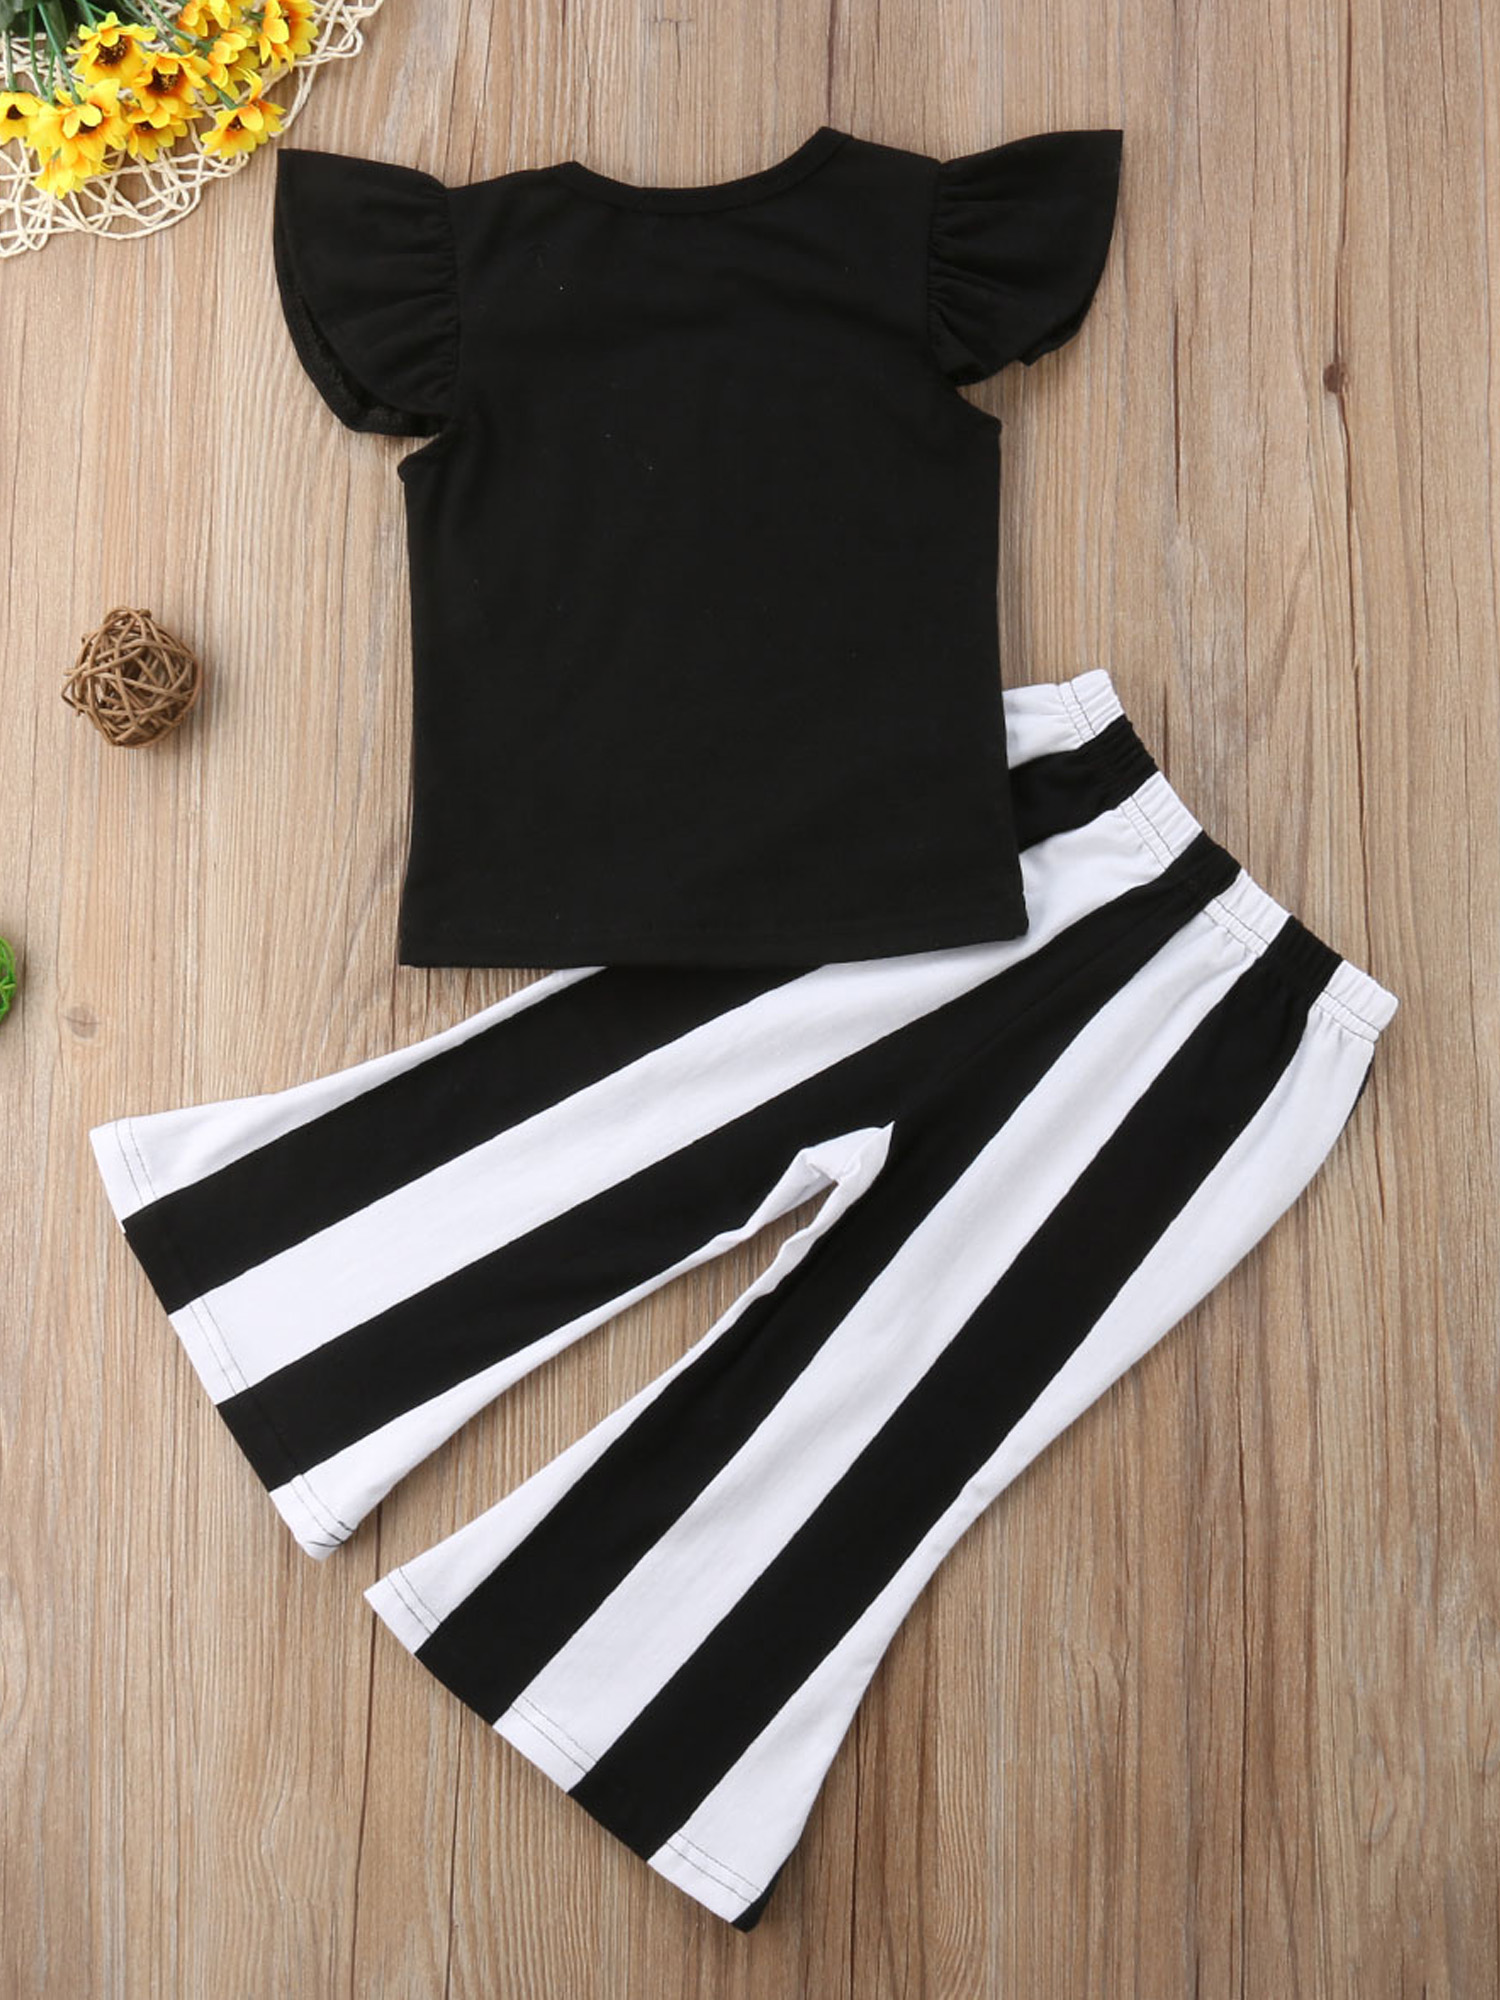 Kids Baby Girl Top T-shirt+Striped Bell Bottom Pants Leggings Outfit ...